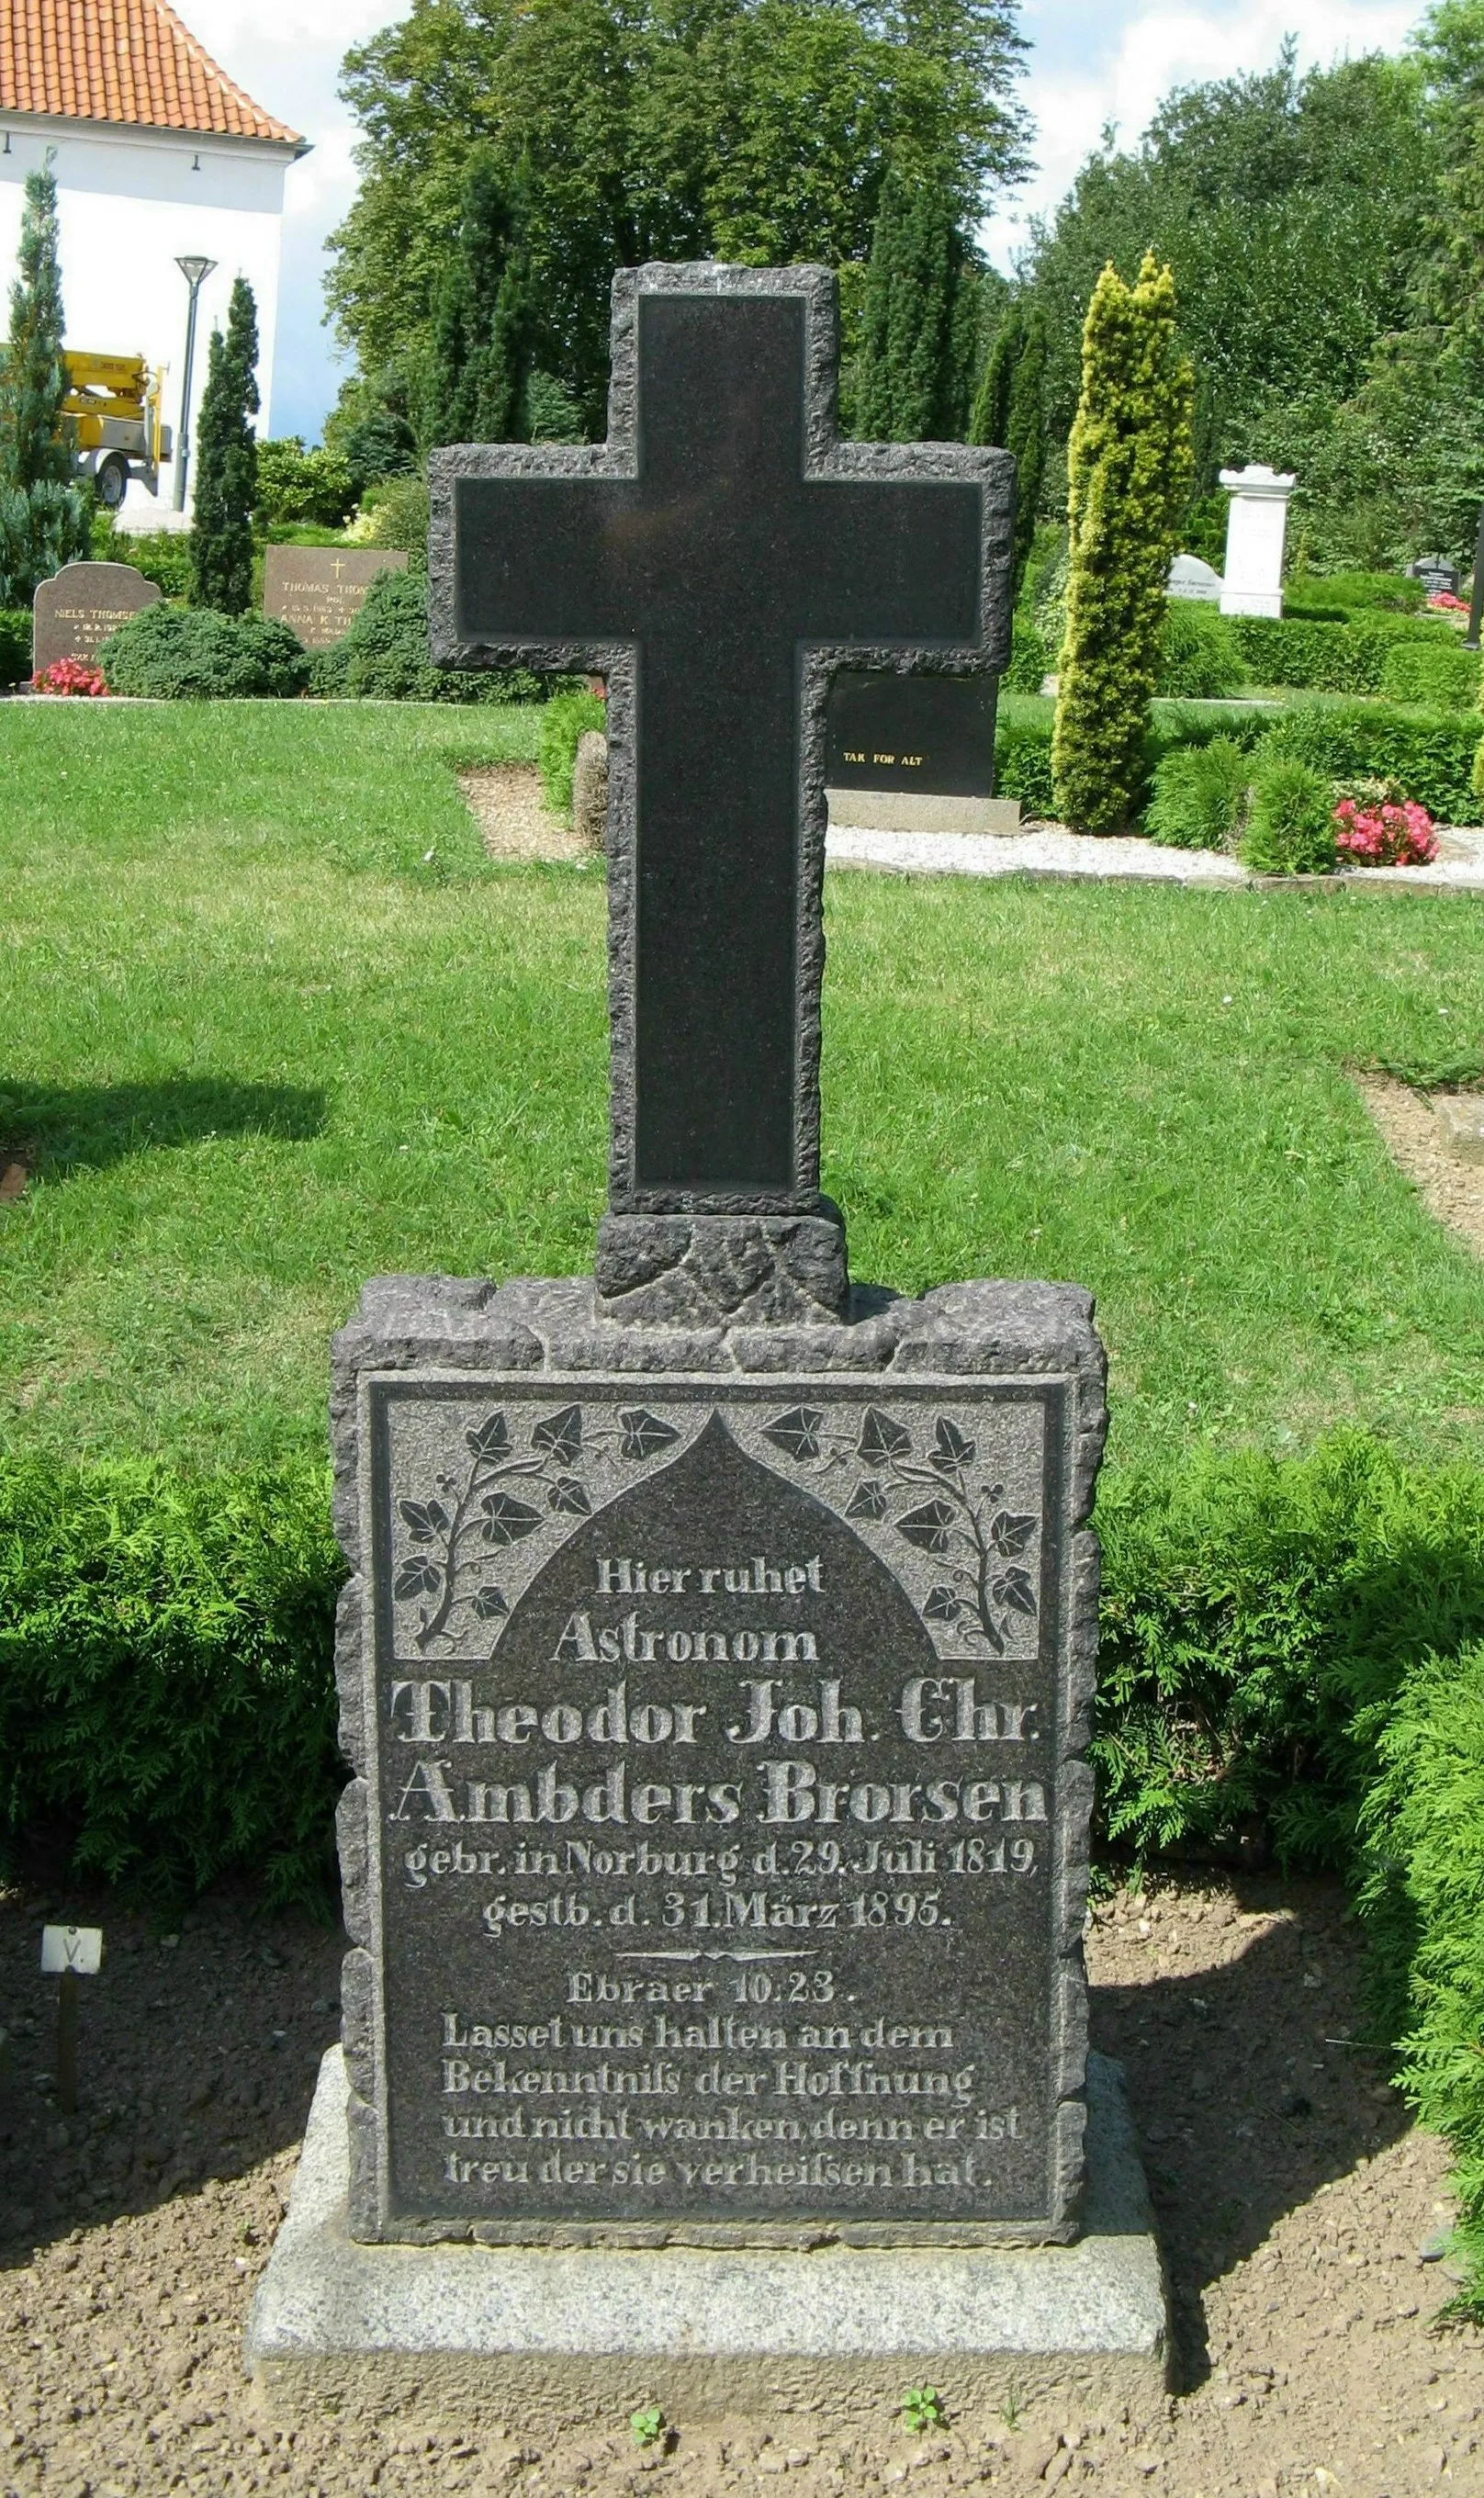 Photo showing: grave of the Danish astronomer Theodor Brorsen in the cemetery of Nordborg